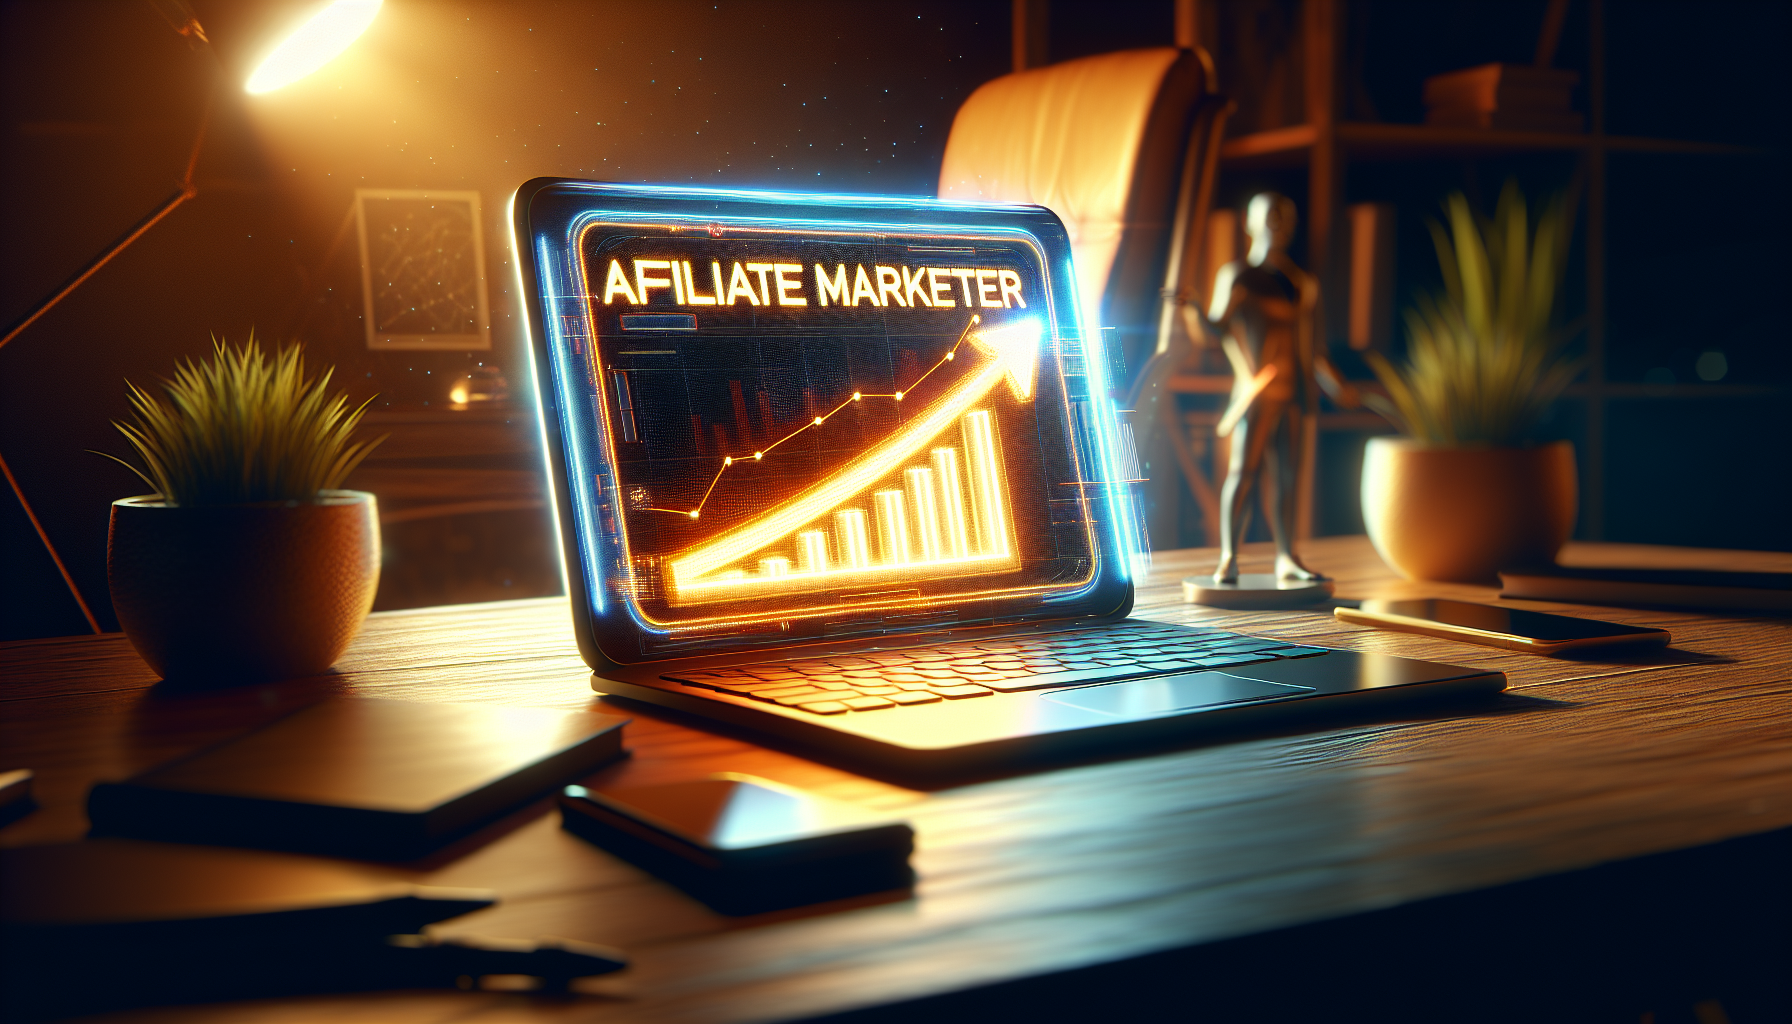 What Are The Advantages Of Being An Affiliate Marketer?